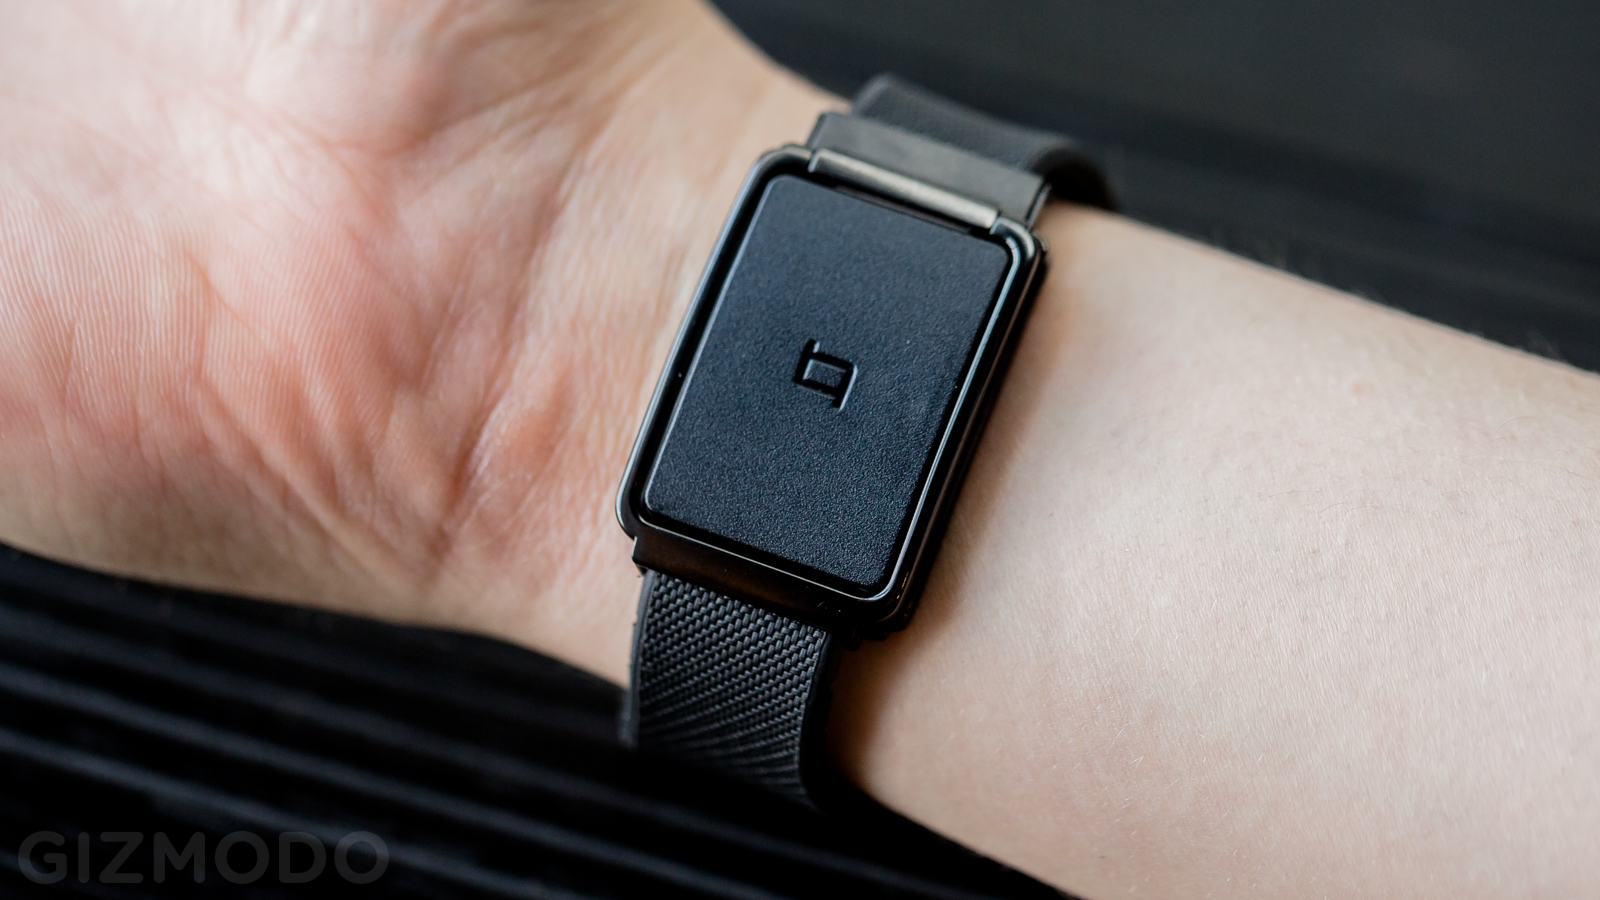 Qualcomm Toq Review: Still Not Time For A Smartwatch